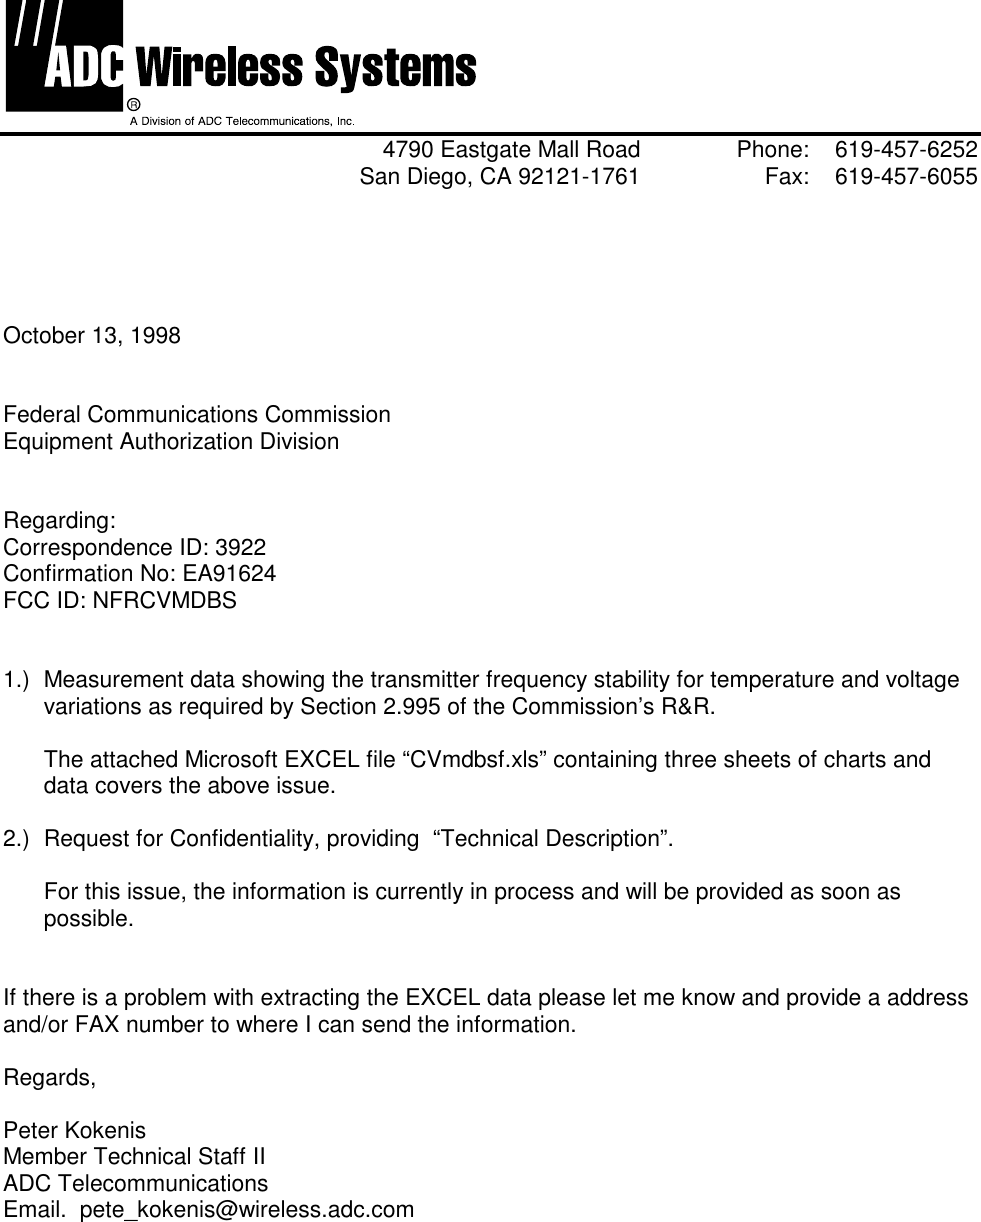 4790 Eastgate Mall Road Phone: 619-457-6252San Diego, CA 92121-1761 Fax: 619-457-6055October 13, 1998Federal Communications CommissionEquipment Authorization DivisionRegarding:Correspondence ID: 3922Confirmation No: EA91624FCC ID: NFRCVMDBS1.)  Measurement data showing the transmitter frequency stability for temperature and voltagevariations as required by Section 2.995 of the Commission’s R&amp;R.  The attached Microsoft EXCEL file “CVmdbsf.xls” containing three sheets of charts anddata covers the above issue. 2.)  Request for Confidentiality, providing  “Technical Description”.For this issue, the information is currently in process and will be provided as soon aspossible.If there is a problem with extracting the EXCEL data please let me know and provide a addressand/or FAX number to where I can send the information.Regards,Peter KokenisMember Technical Staff IIADC TelecommunicationsEmail.  pete_kokenis@wireless.adc.com